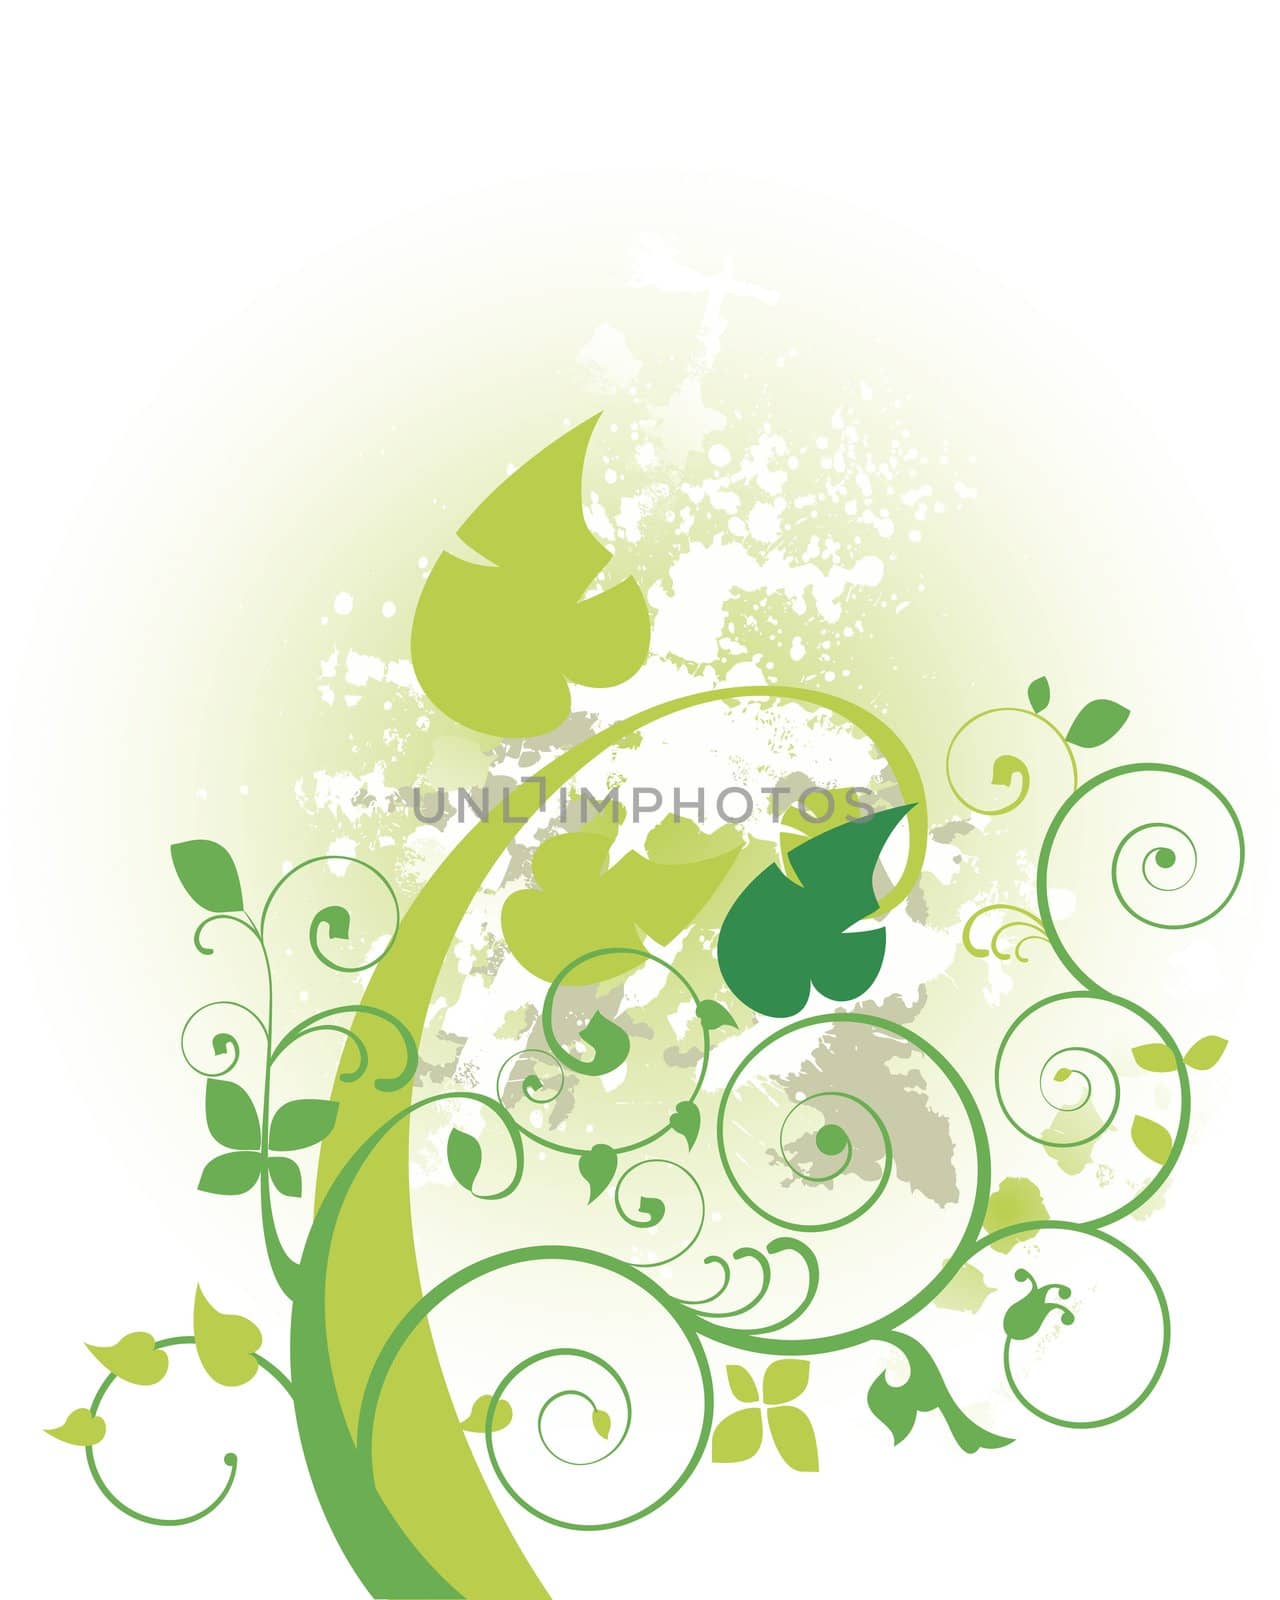 nature background with grunge design and green foliage and leaves